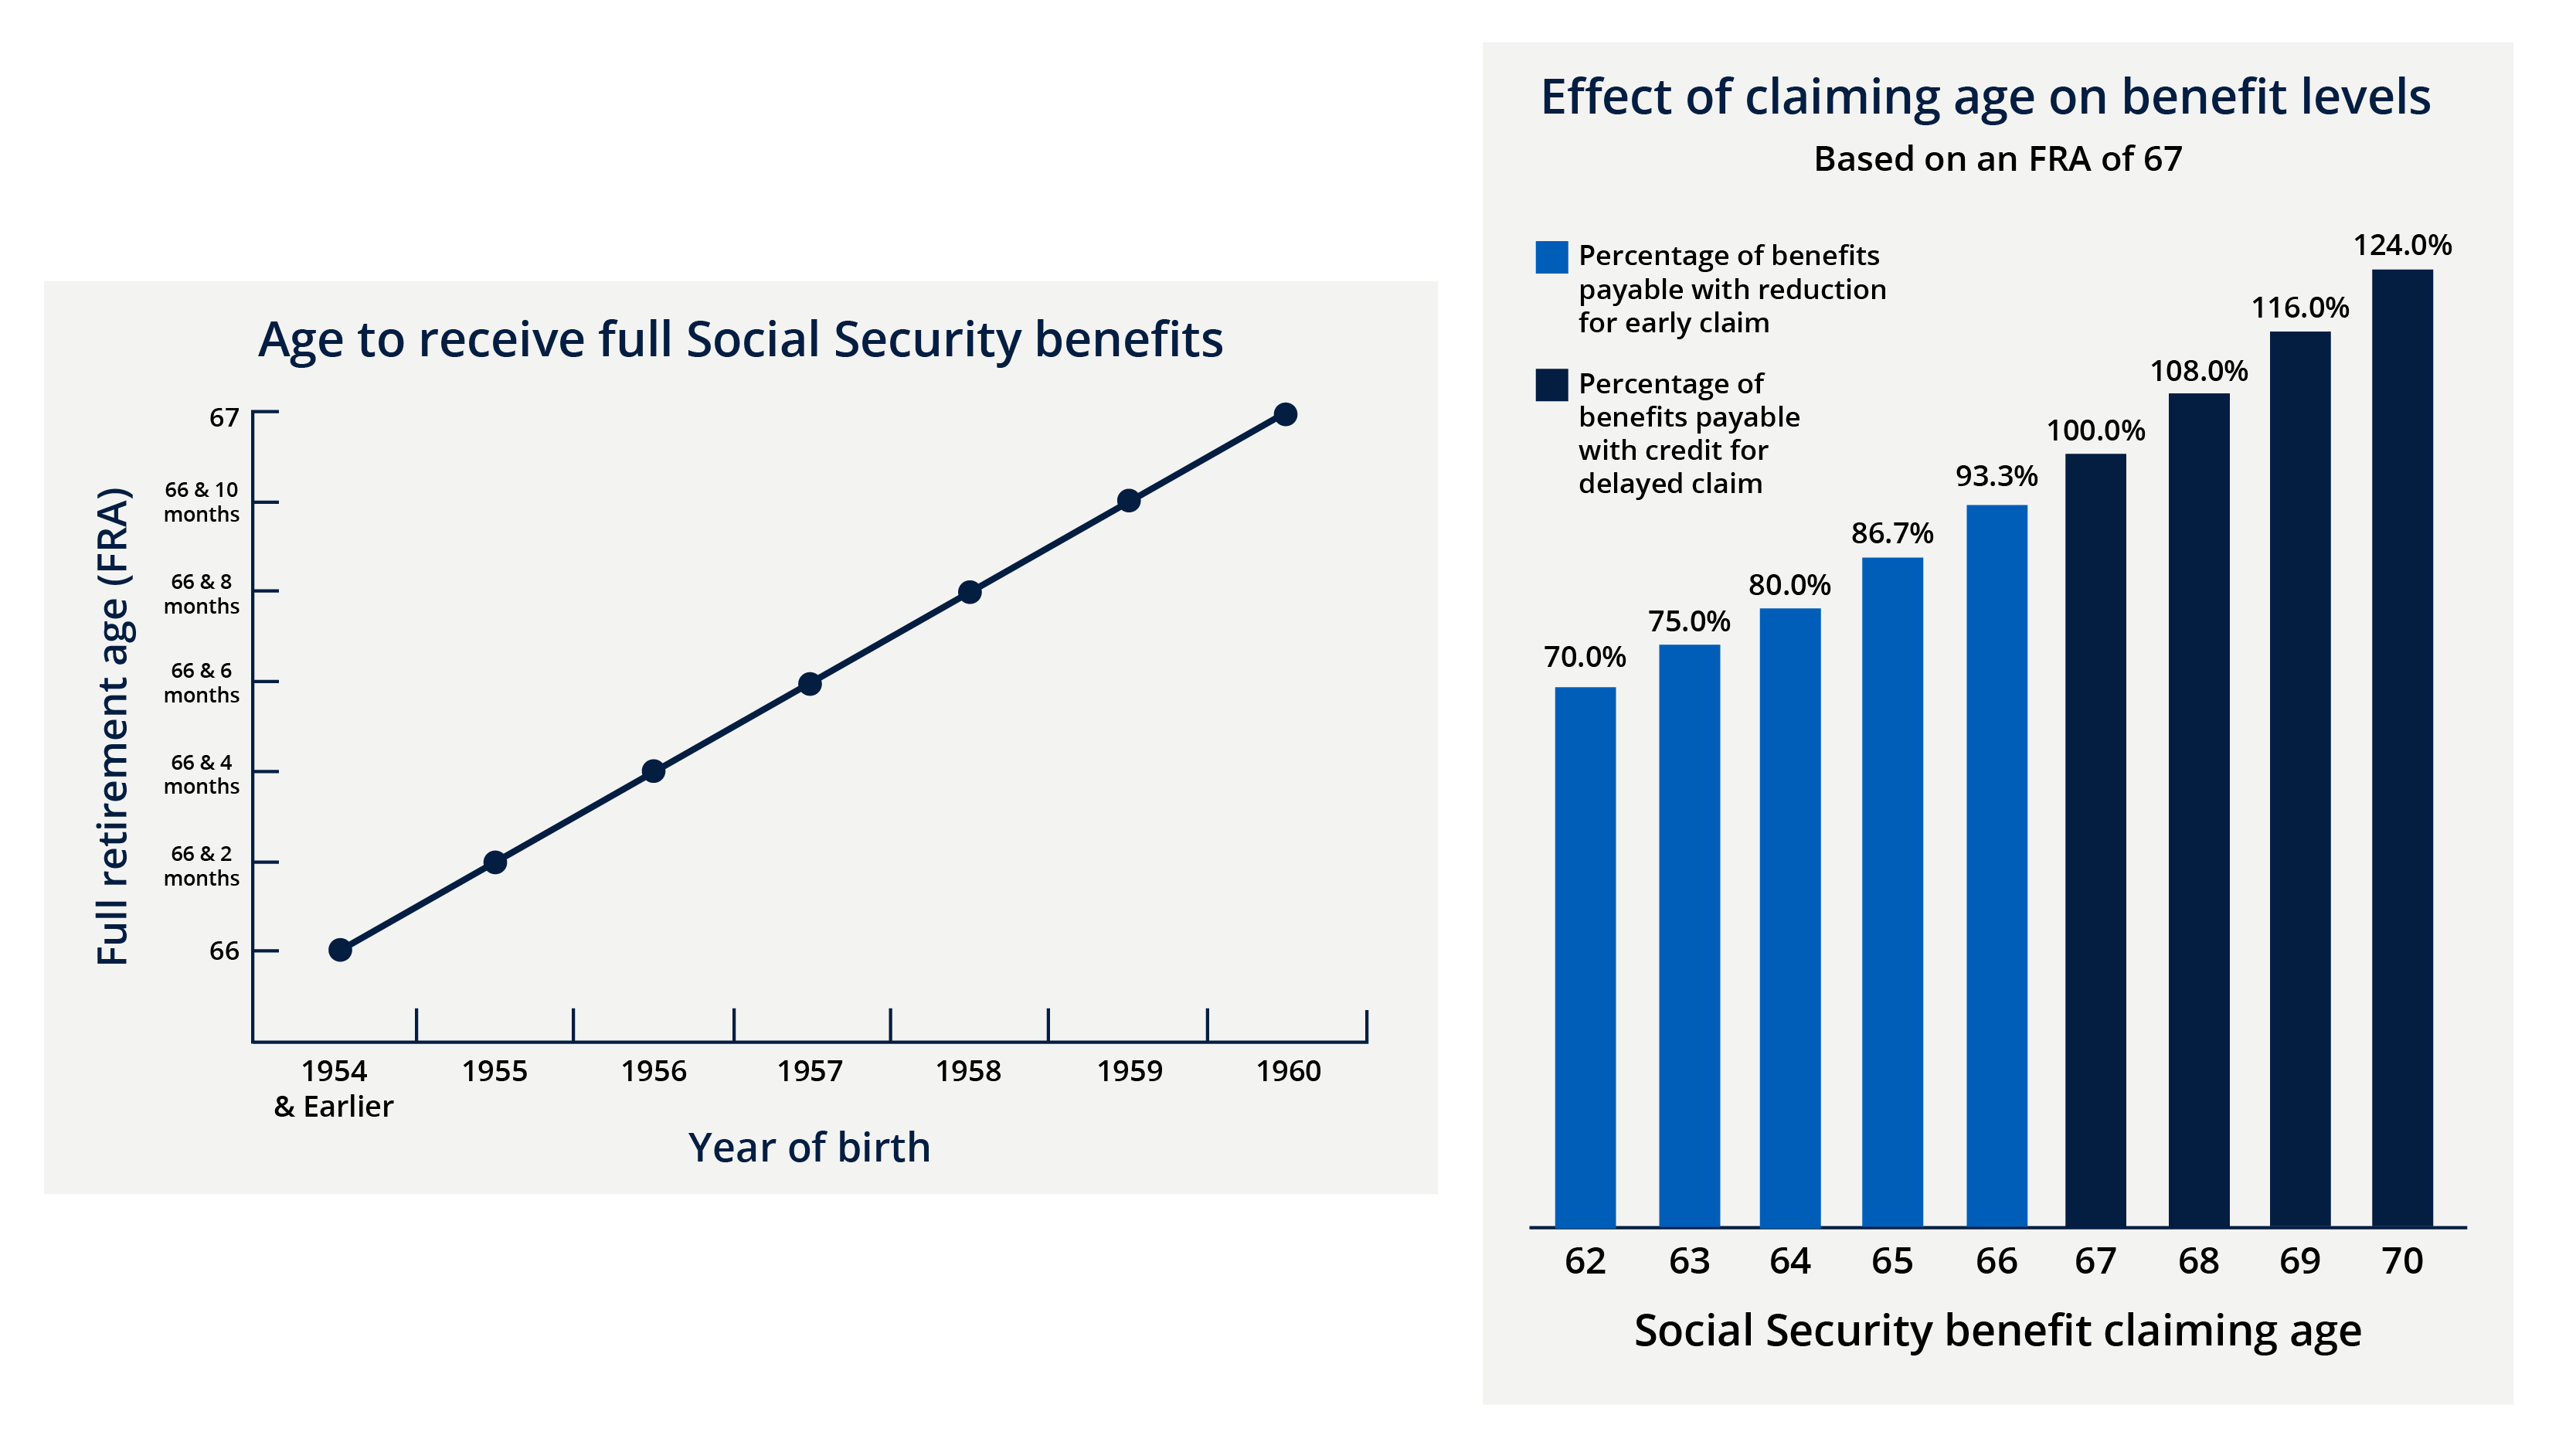 "Age to receive full Social Security benefits" and "Effect of claiming age on benefit levels" graphic